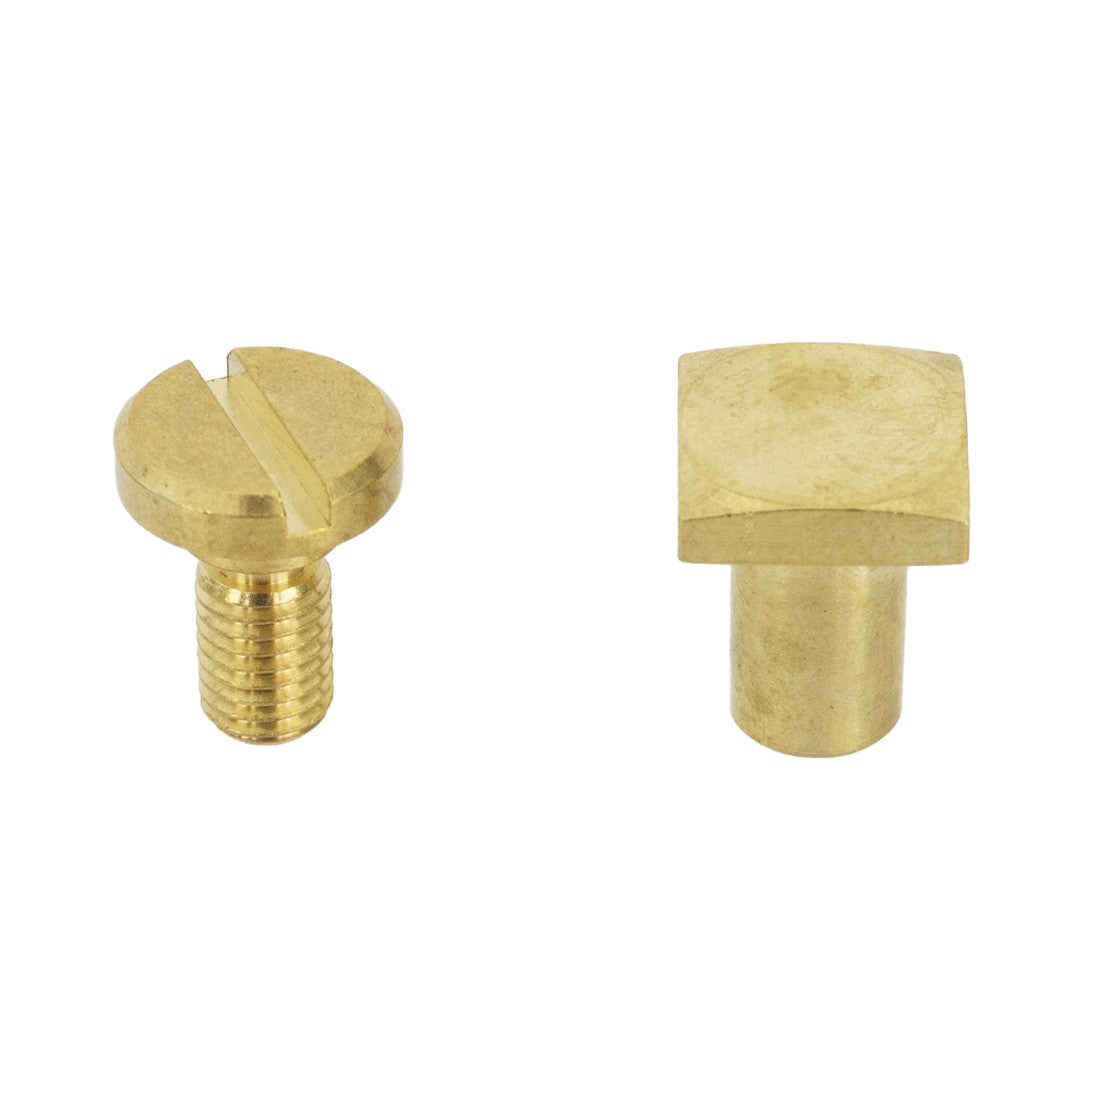 Sörbo Replacement Square Nut and Screw - 1385 Series Seperate Top View